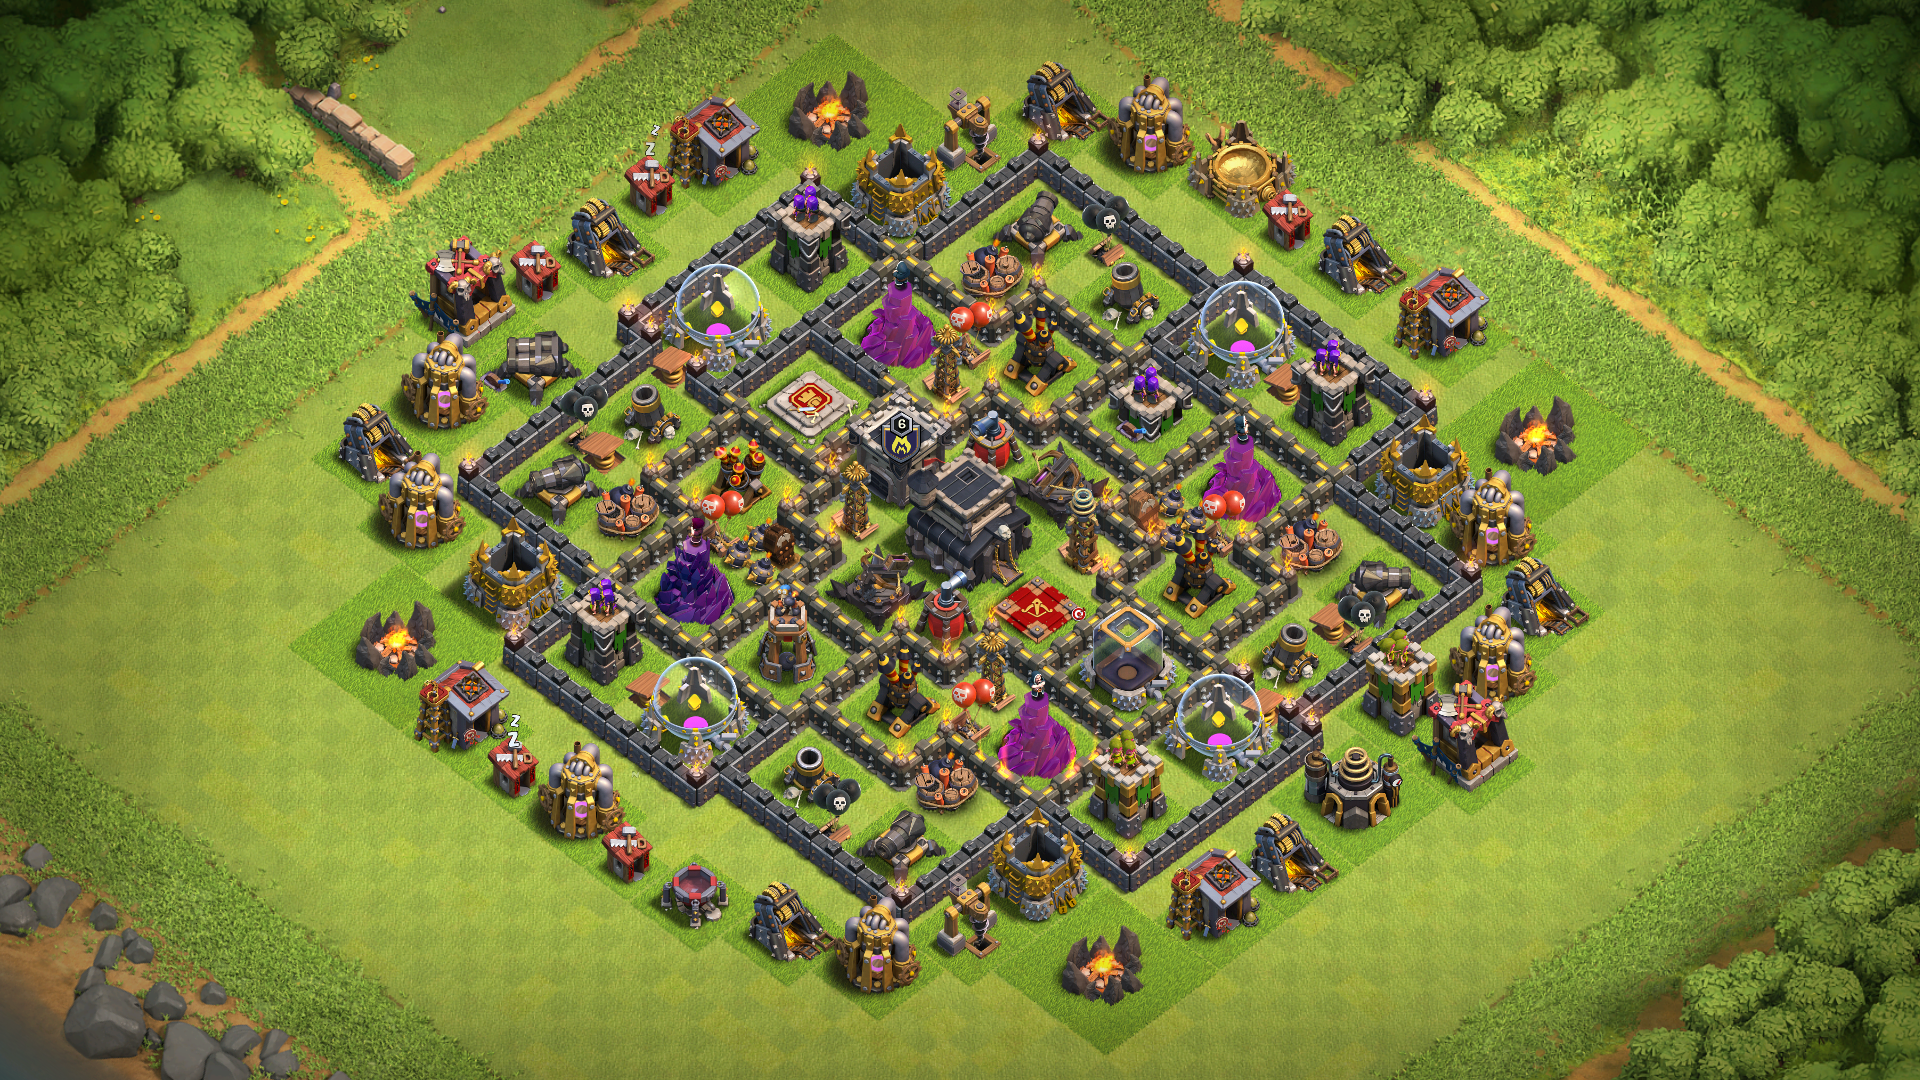 Clash of clans th. Clash of Clans th9 Base. Bases 9th Clash of Clans. Clash of Clans th9. Clash of Clans best Base th9.